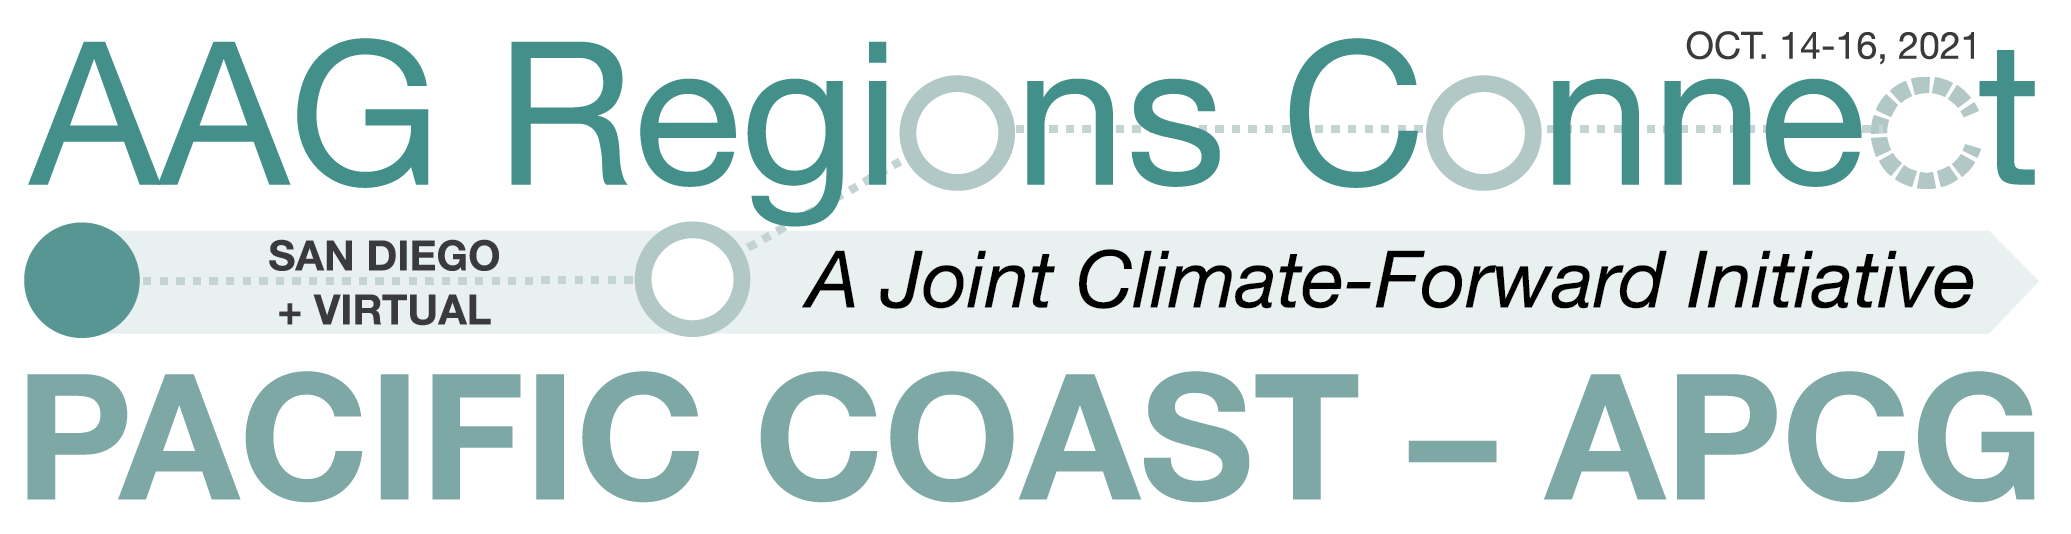 AAG Regions Connect Logo